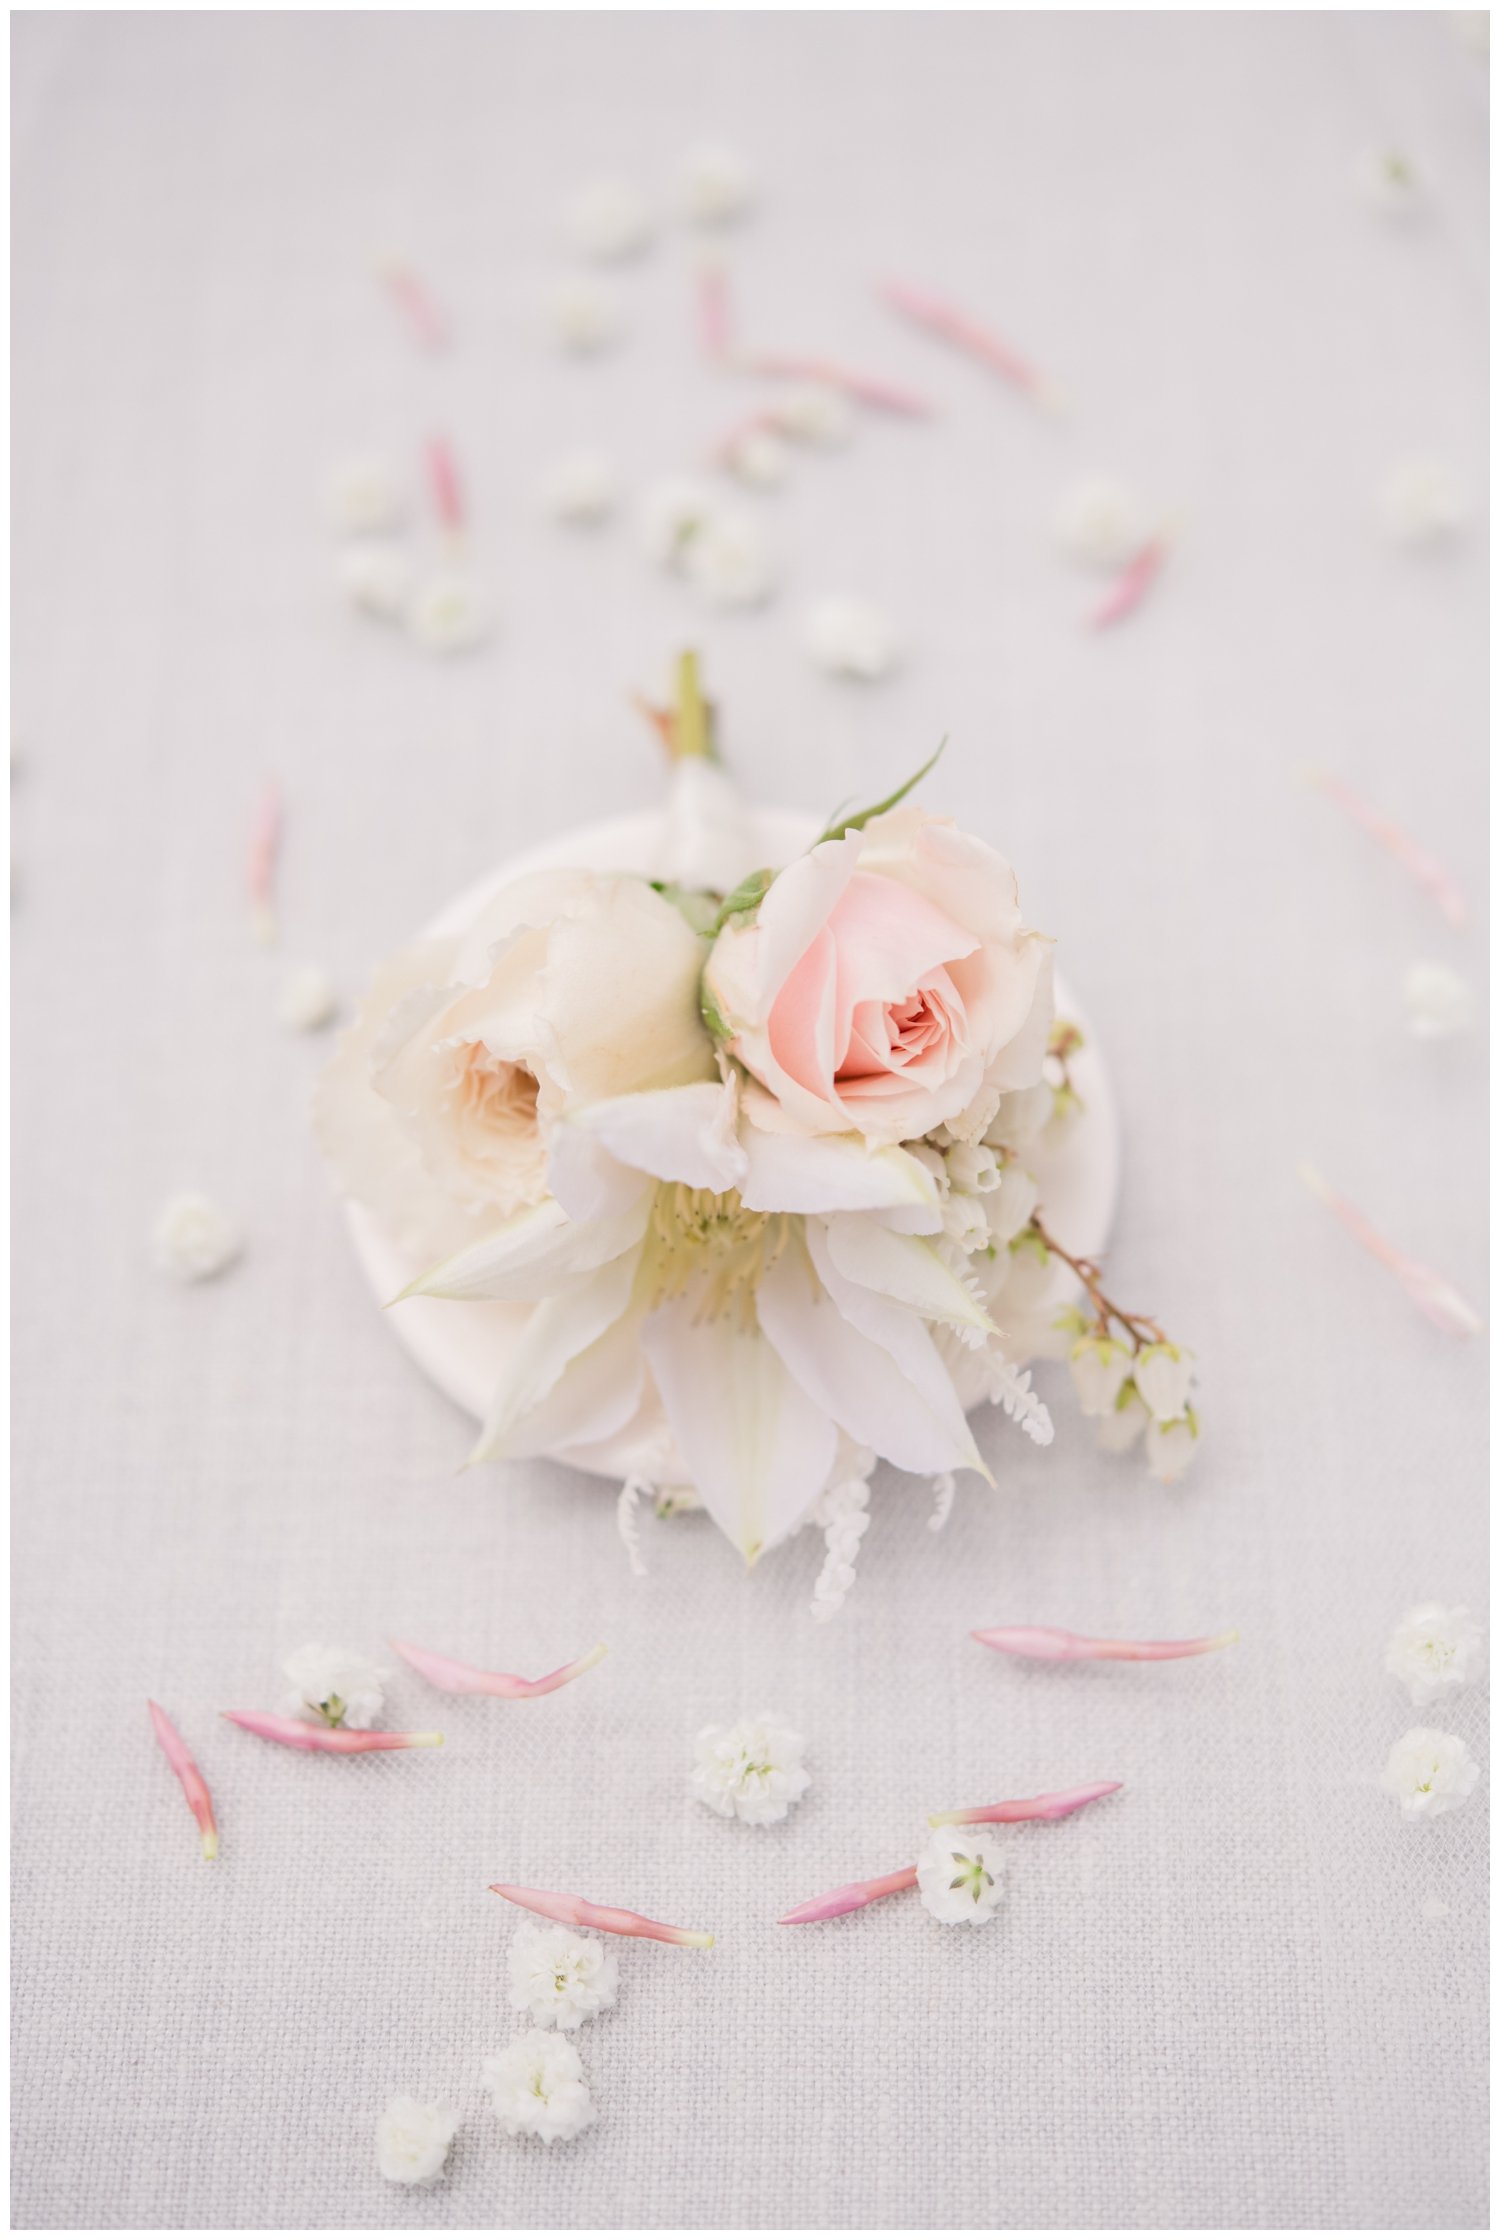 white flower surrounded by white petals flatlay